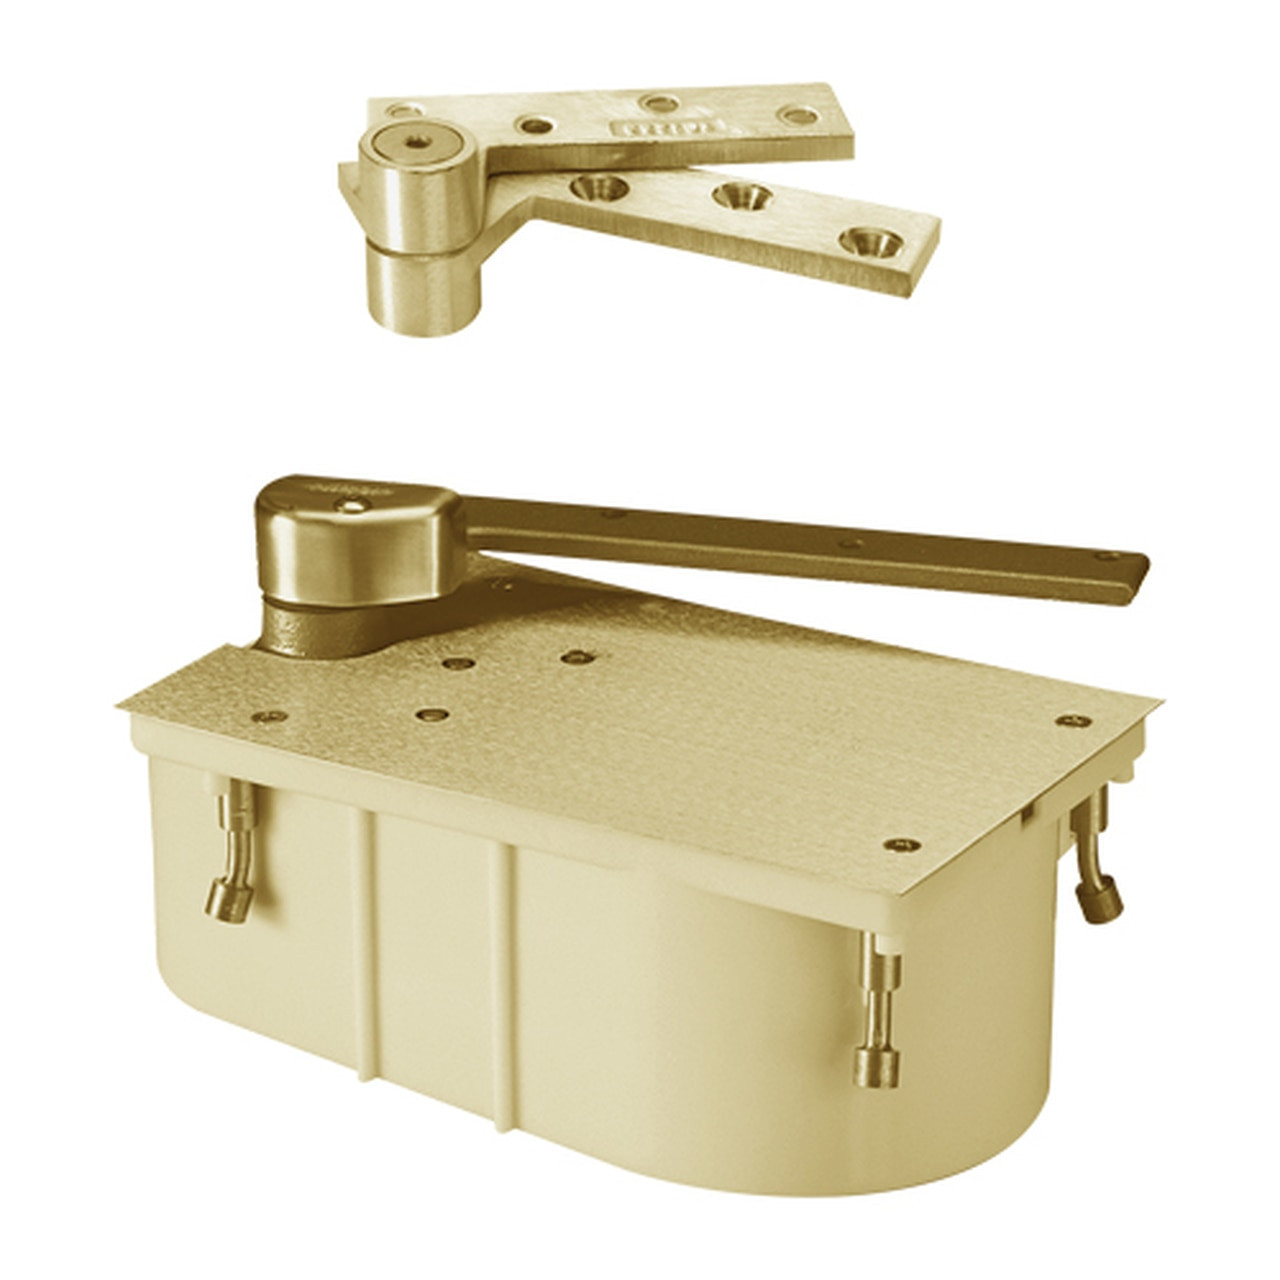 F27-85N-CWF-LH-606 Rixson 27 Series Fire Rated Heavy Duty 3/4" Offset Hung Floor Closer in Satin Brass Finish